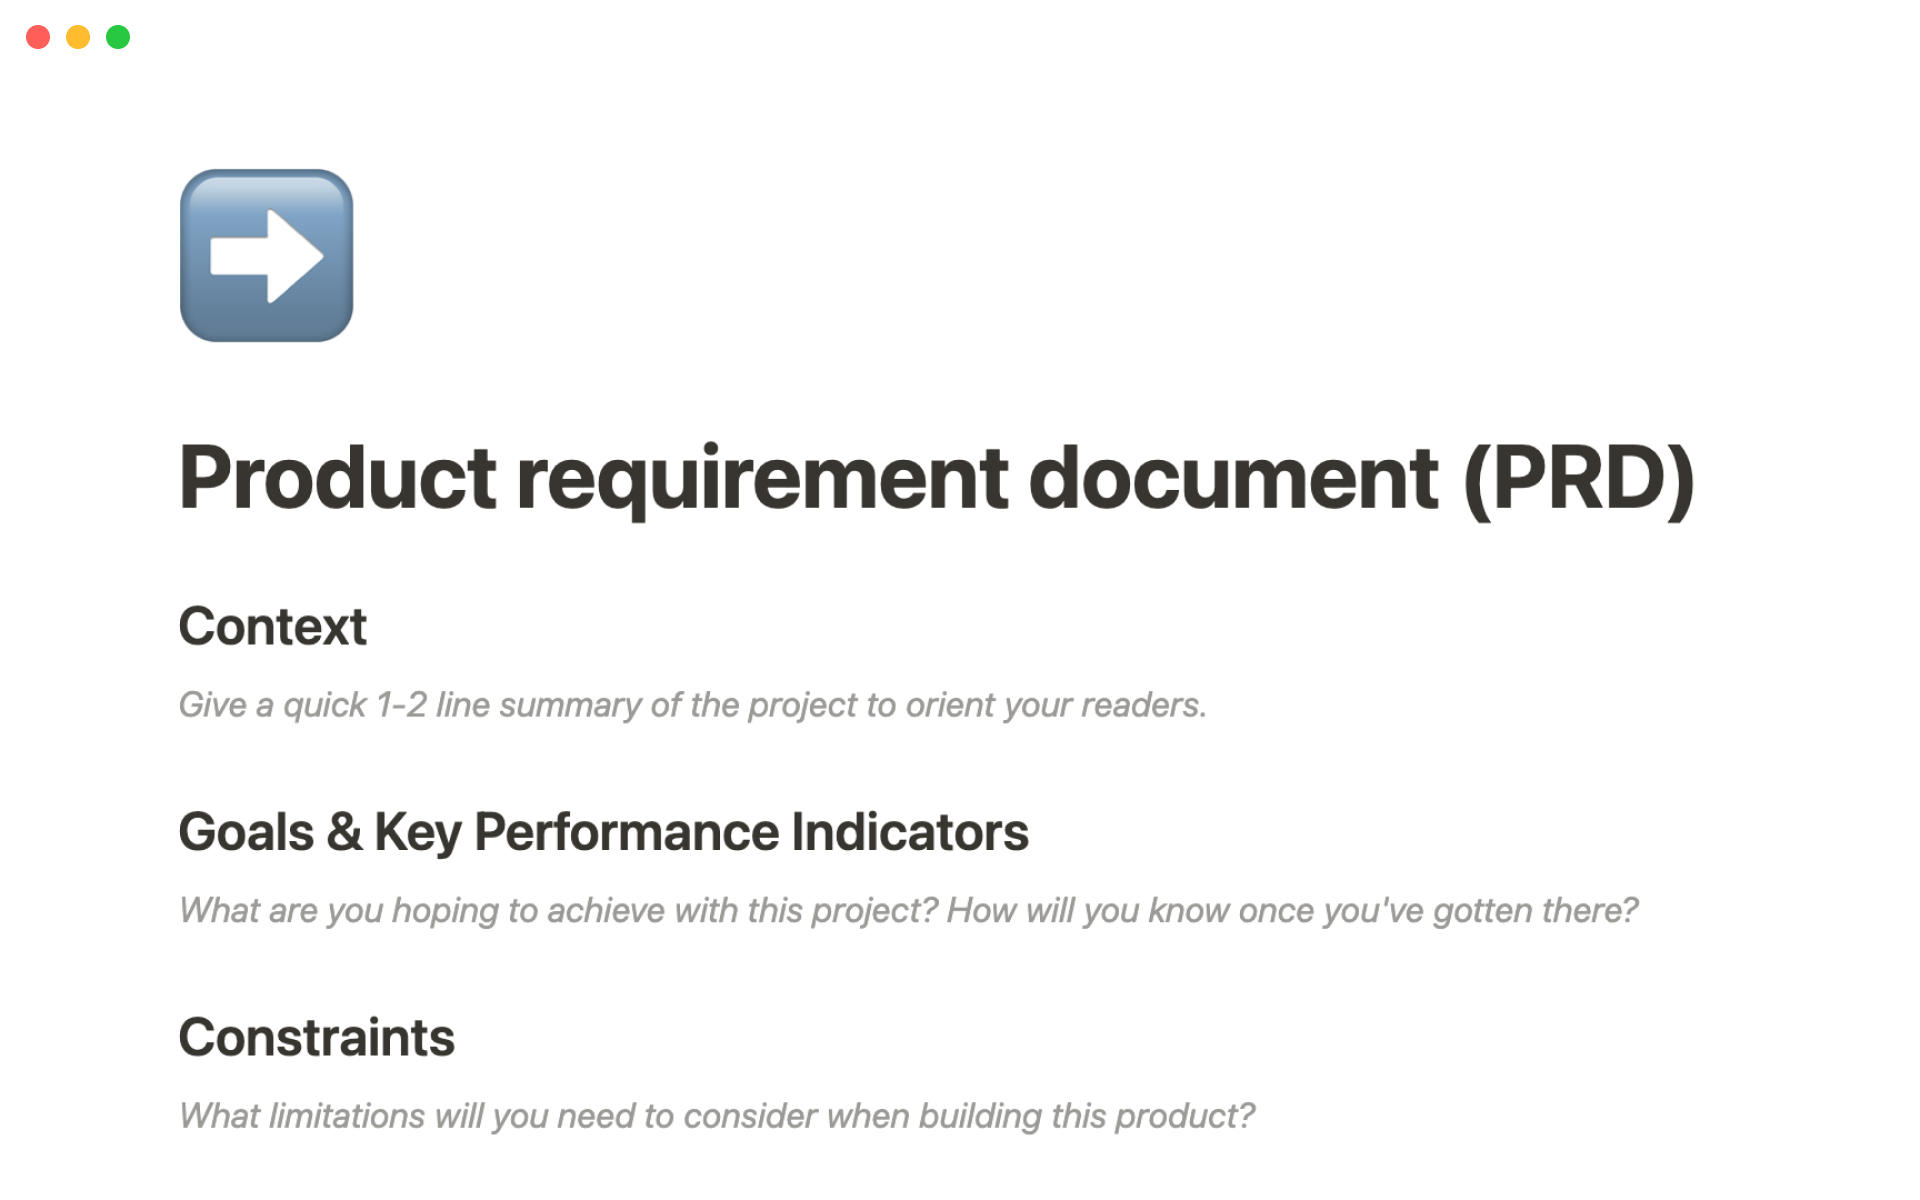 Notion Template Gallery Product requirement document (PRD)